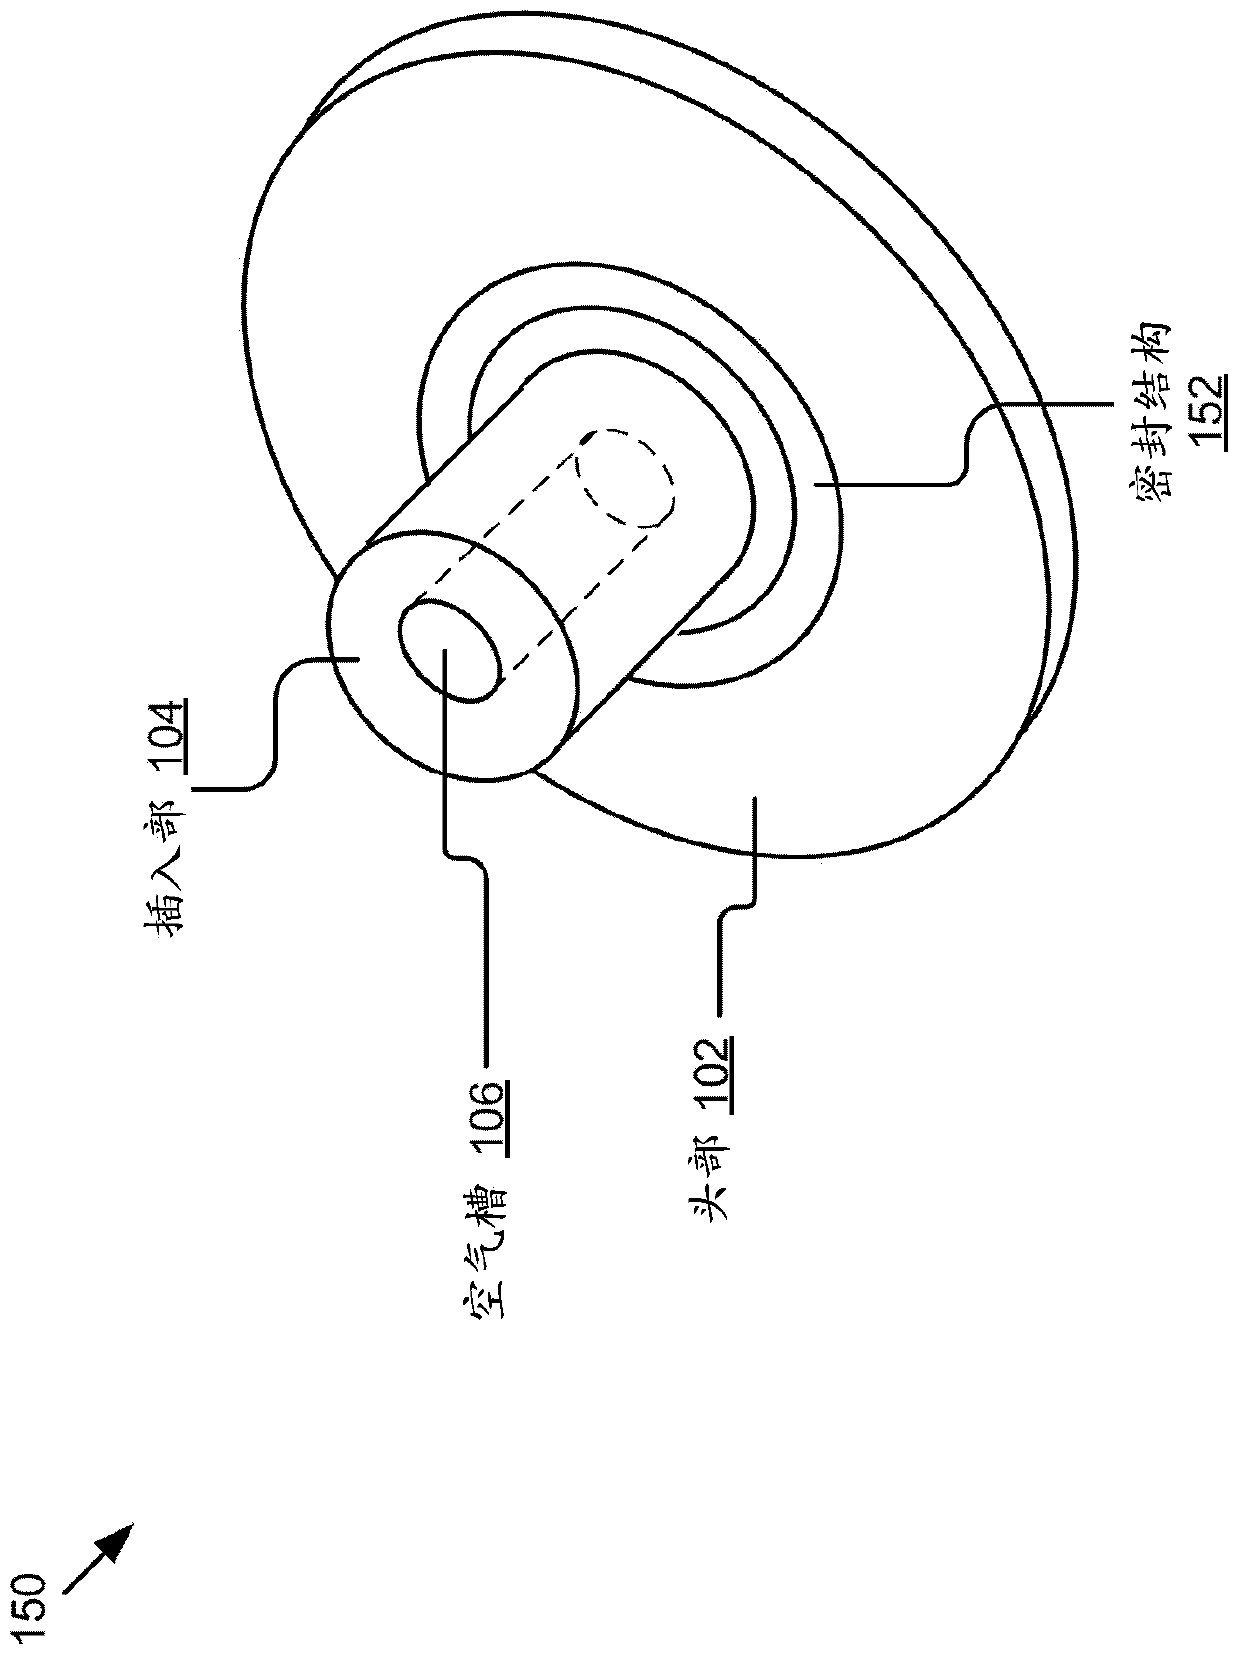 Headphones including quality port for frequency response adjustment